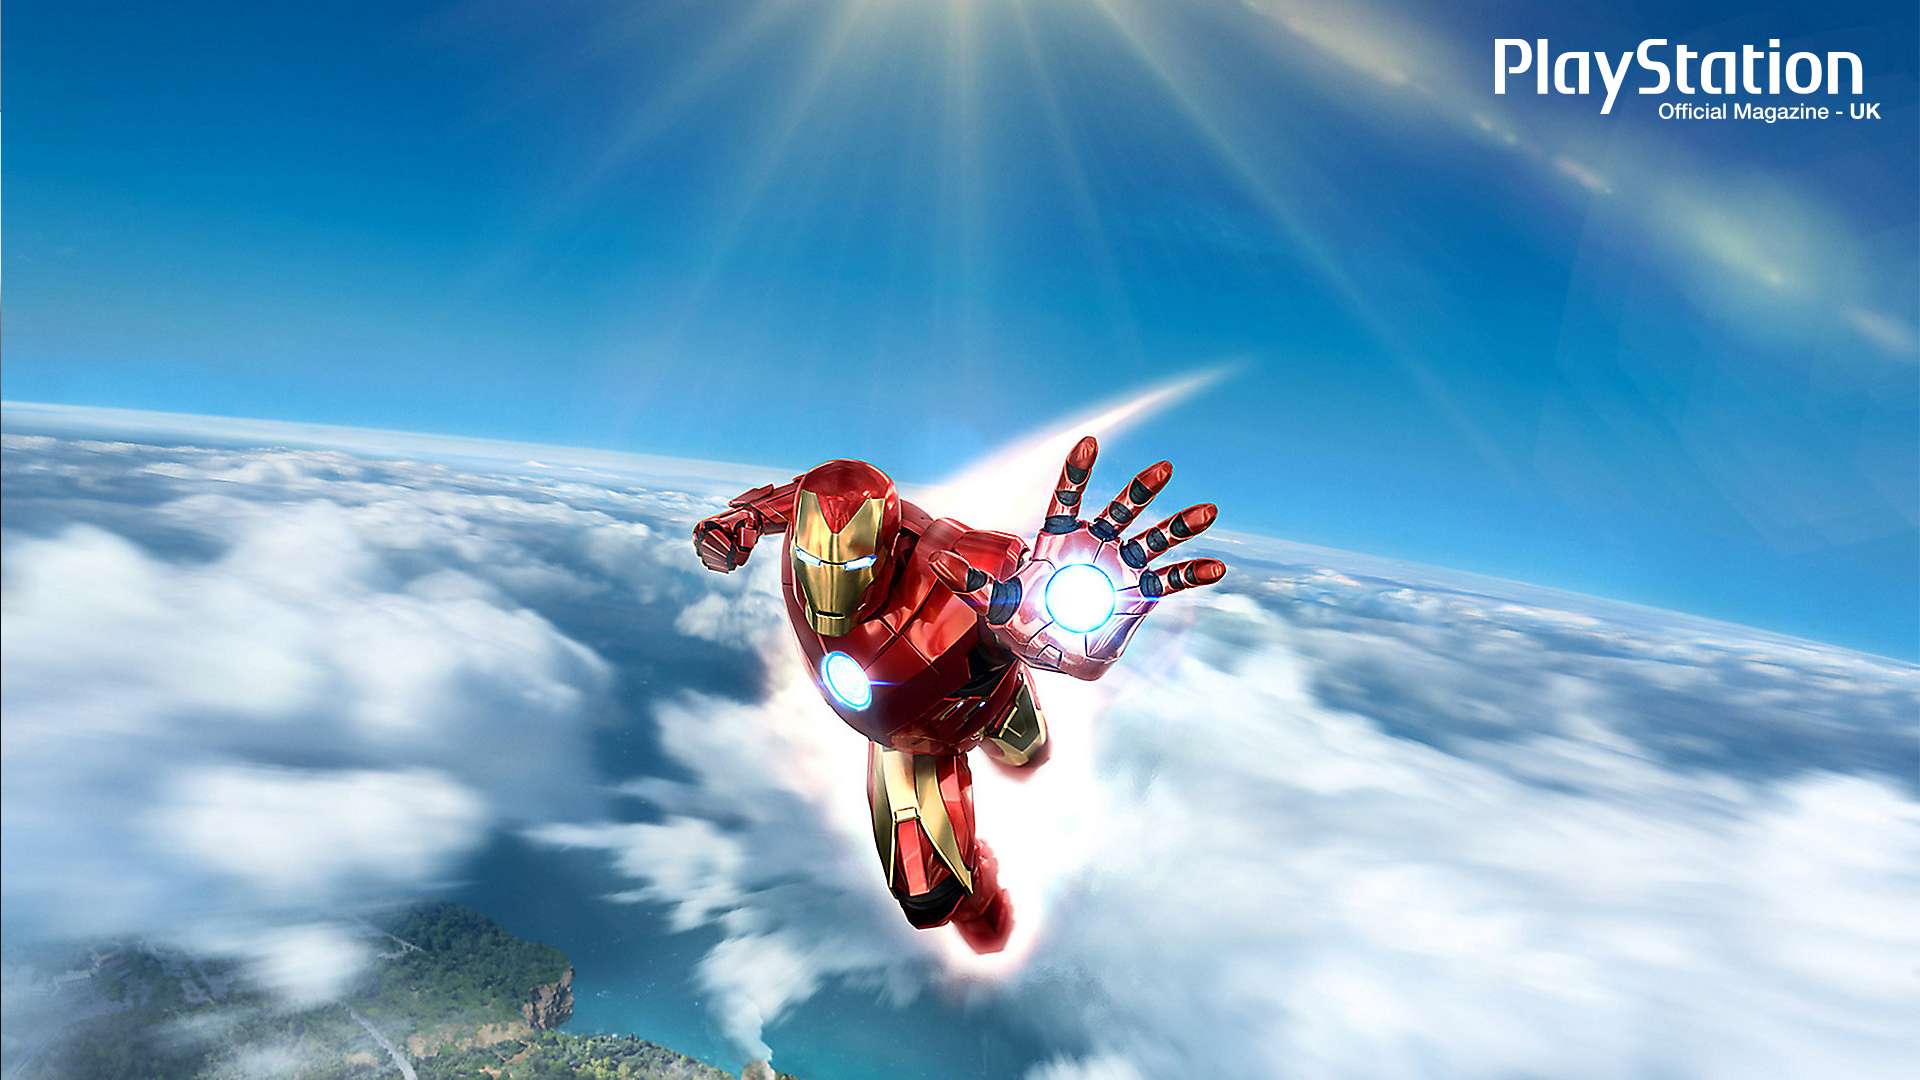 “We zeroed in on capturing the sense of freedom and power of flying”: Becoming Marvel’s most famous Avenger in Iron Man VR